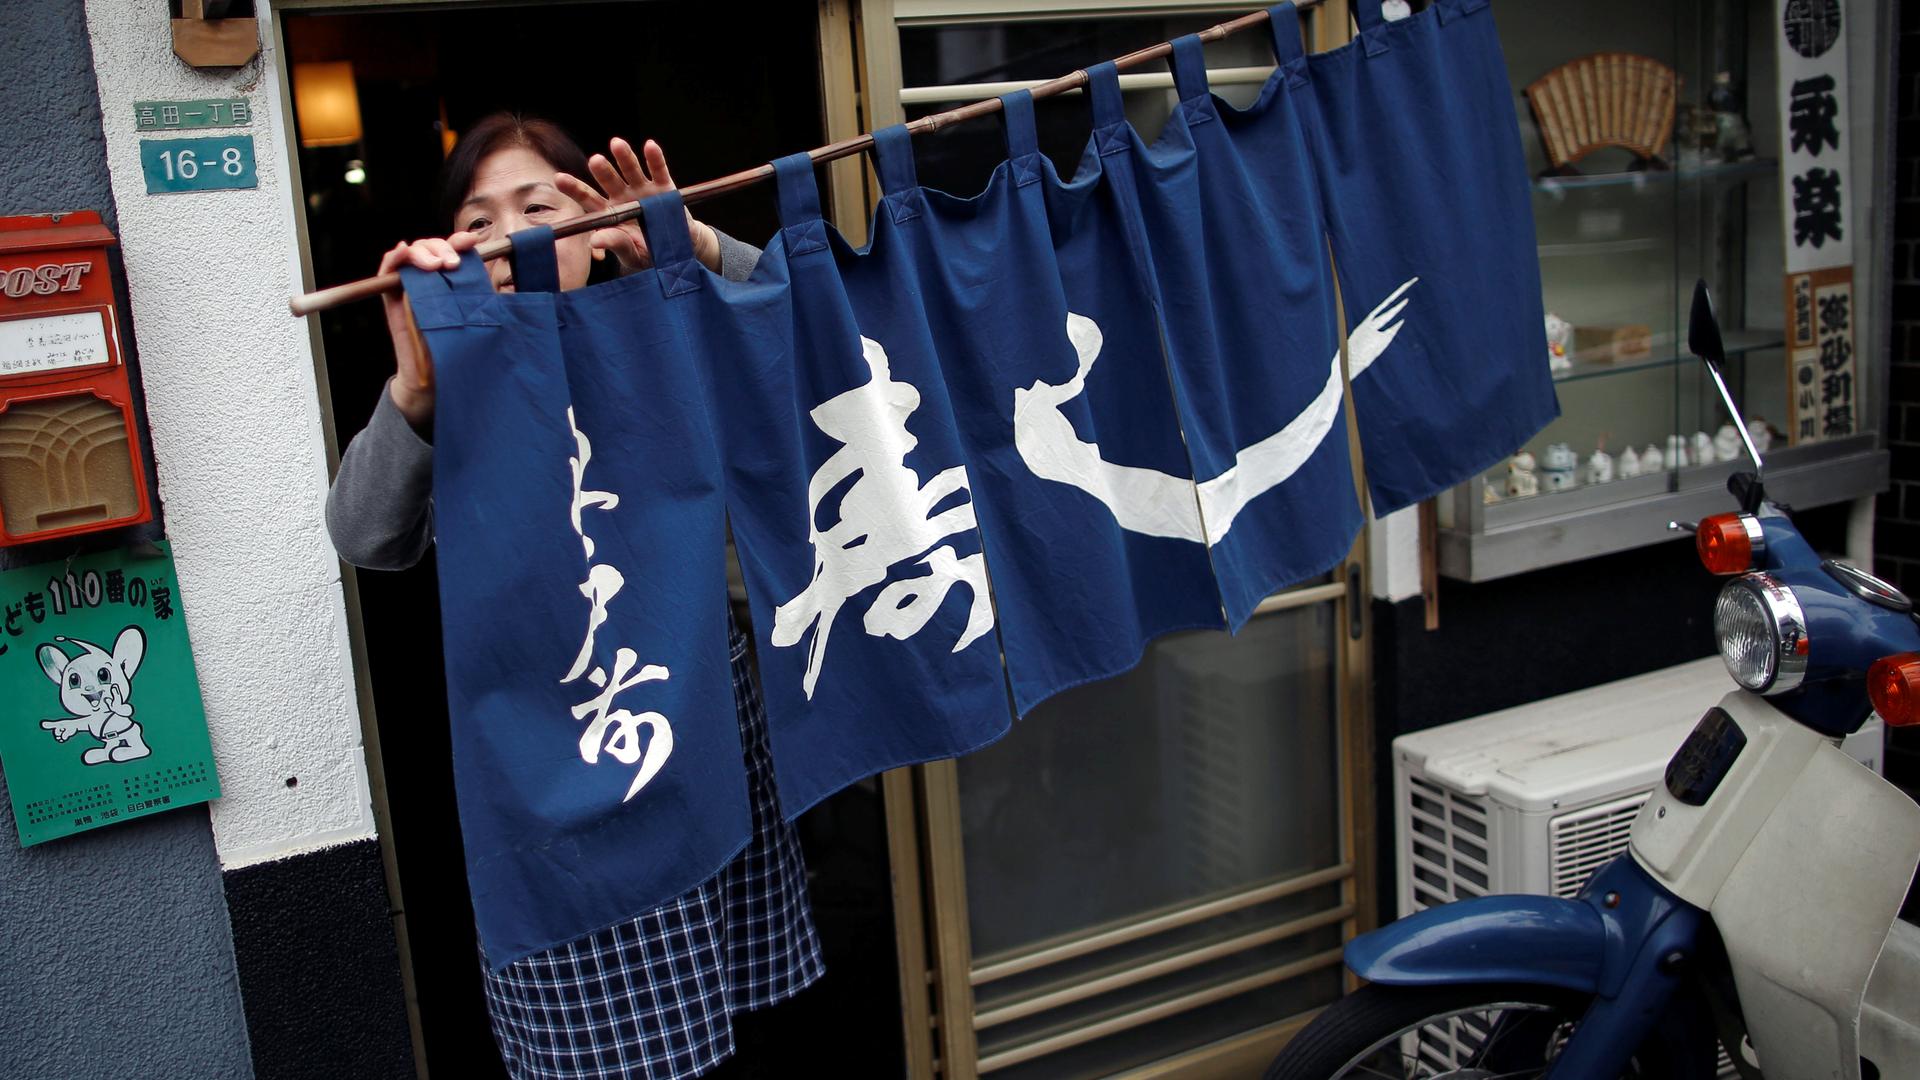 A woman moves a blue curtain with Japanese script as she opens the restaurant.